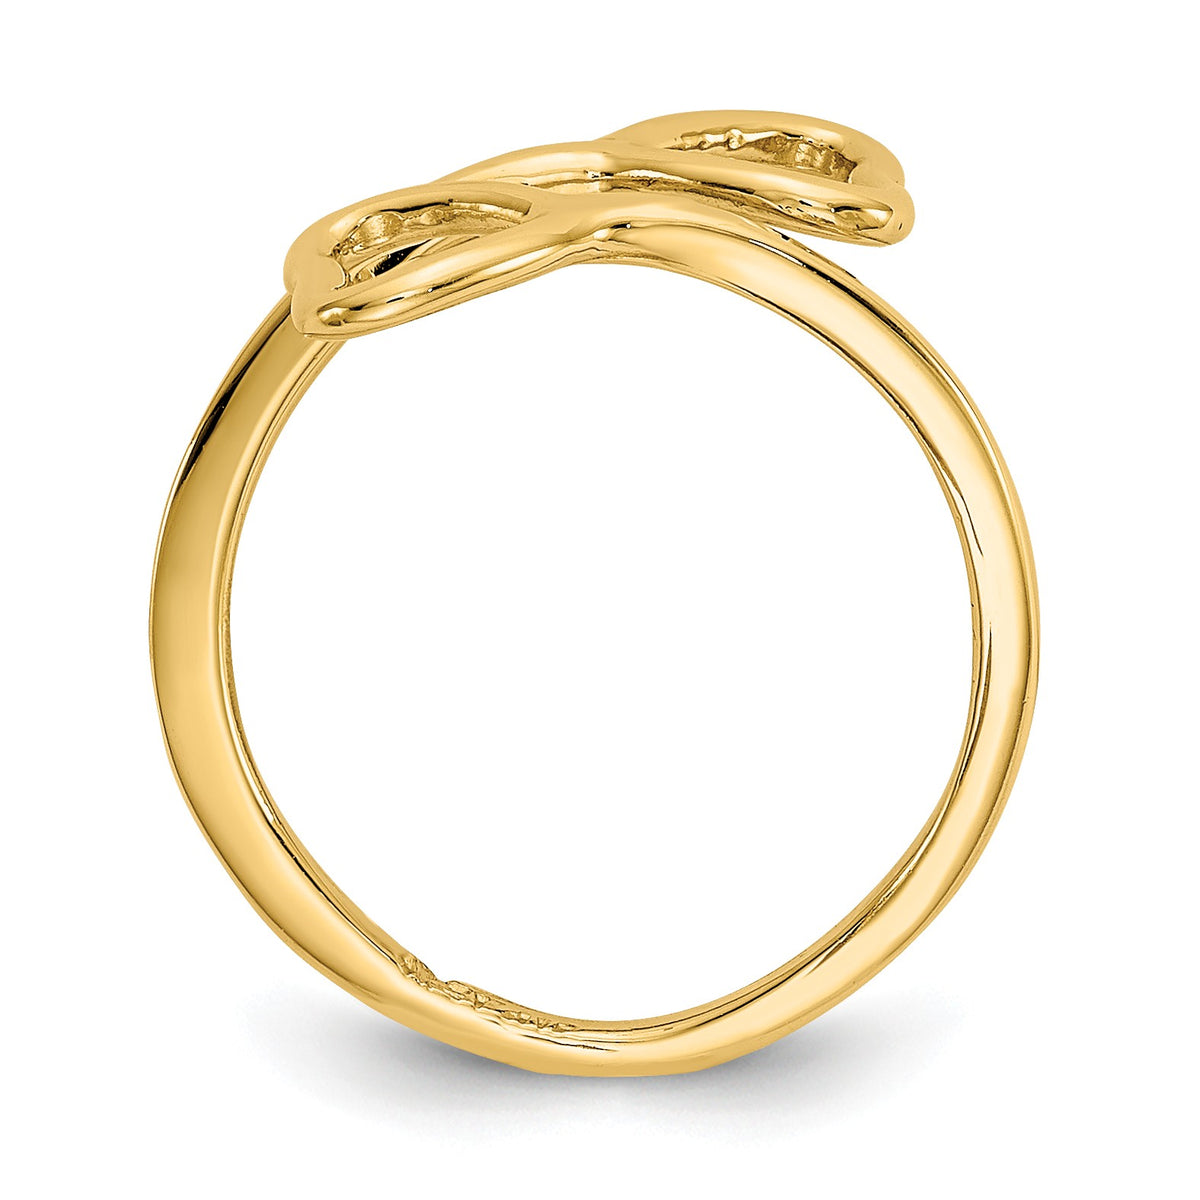 Alternate view of the Double Heart Toe Ring in 14 Karat Gold by The Black Bow Jewelry Co.